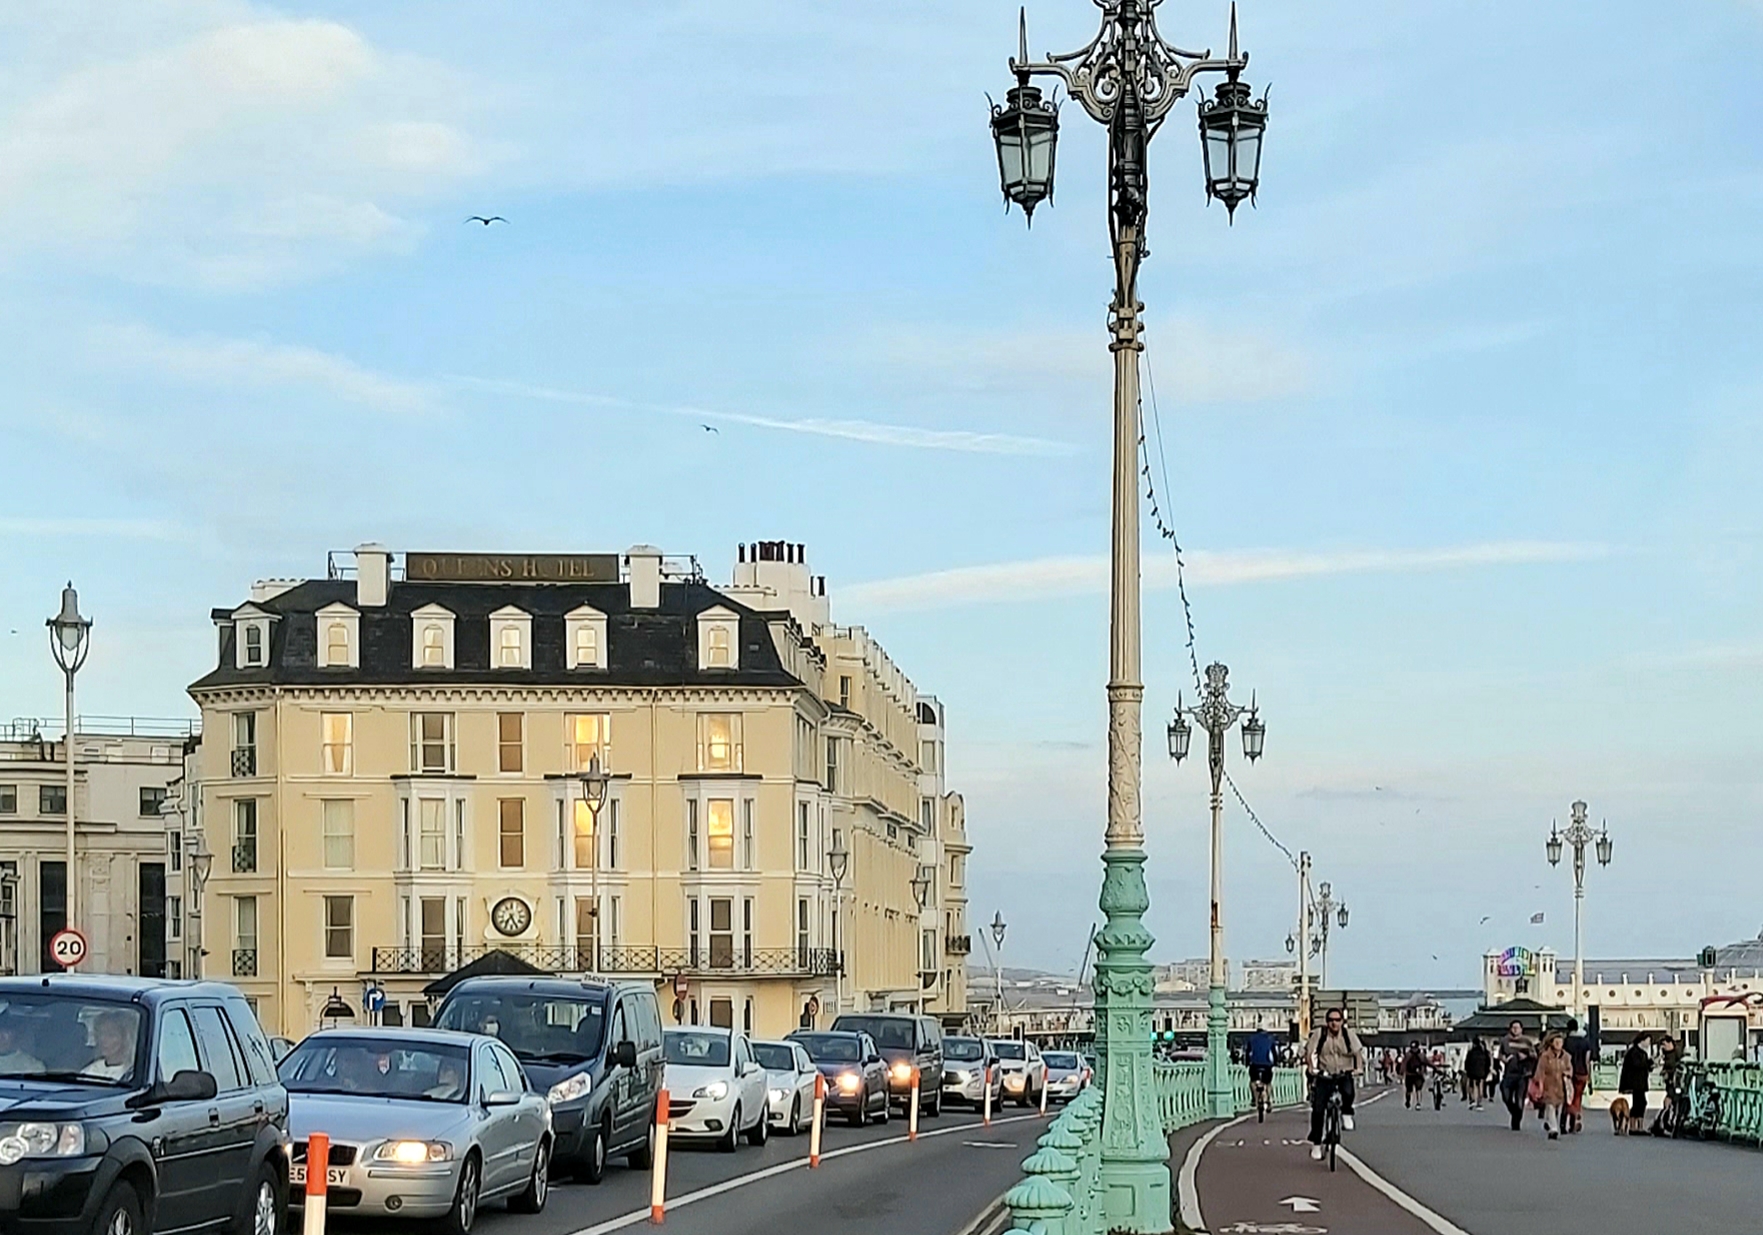 Photo from https://www.brightonandhovenews.org/2020/09/06/lets-learn-from-the-seafront-cycle-lane-fiasco-say-valley-gardens-campaigners/